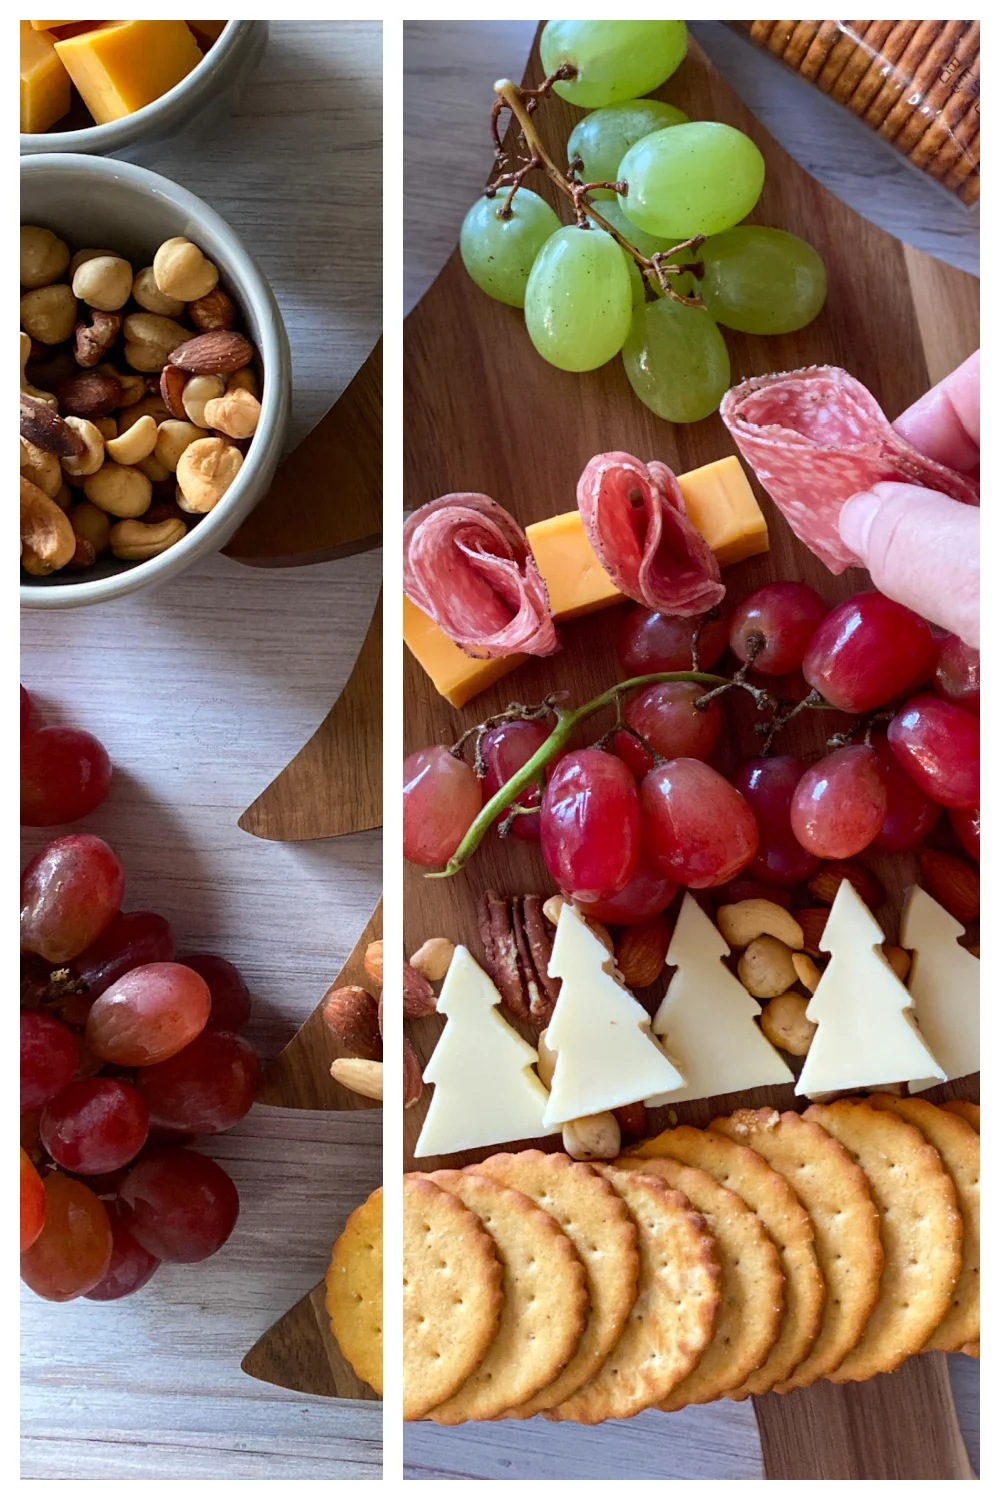 Putting together the holiday cheeseboard for small gatherings